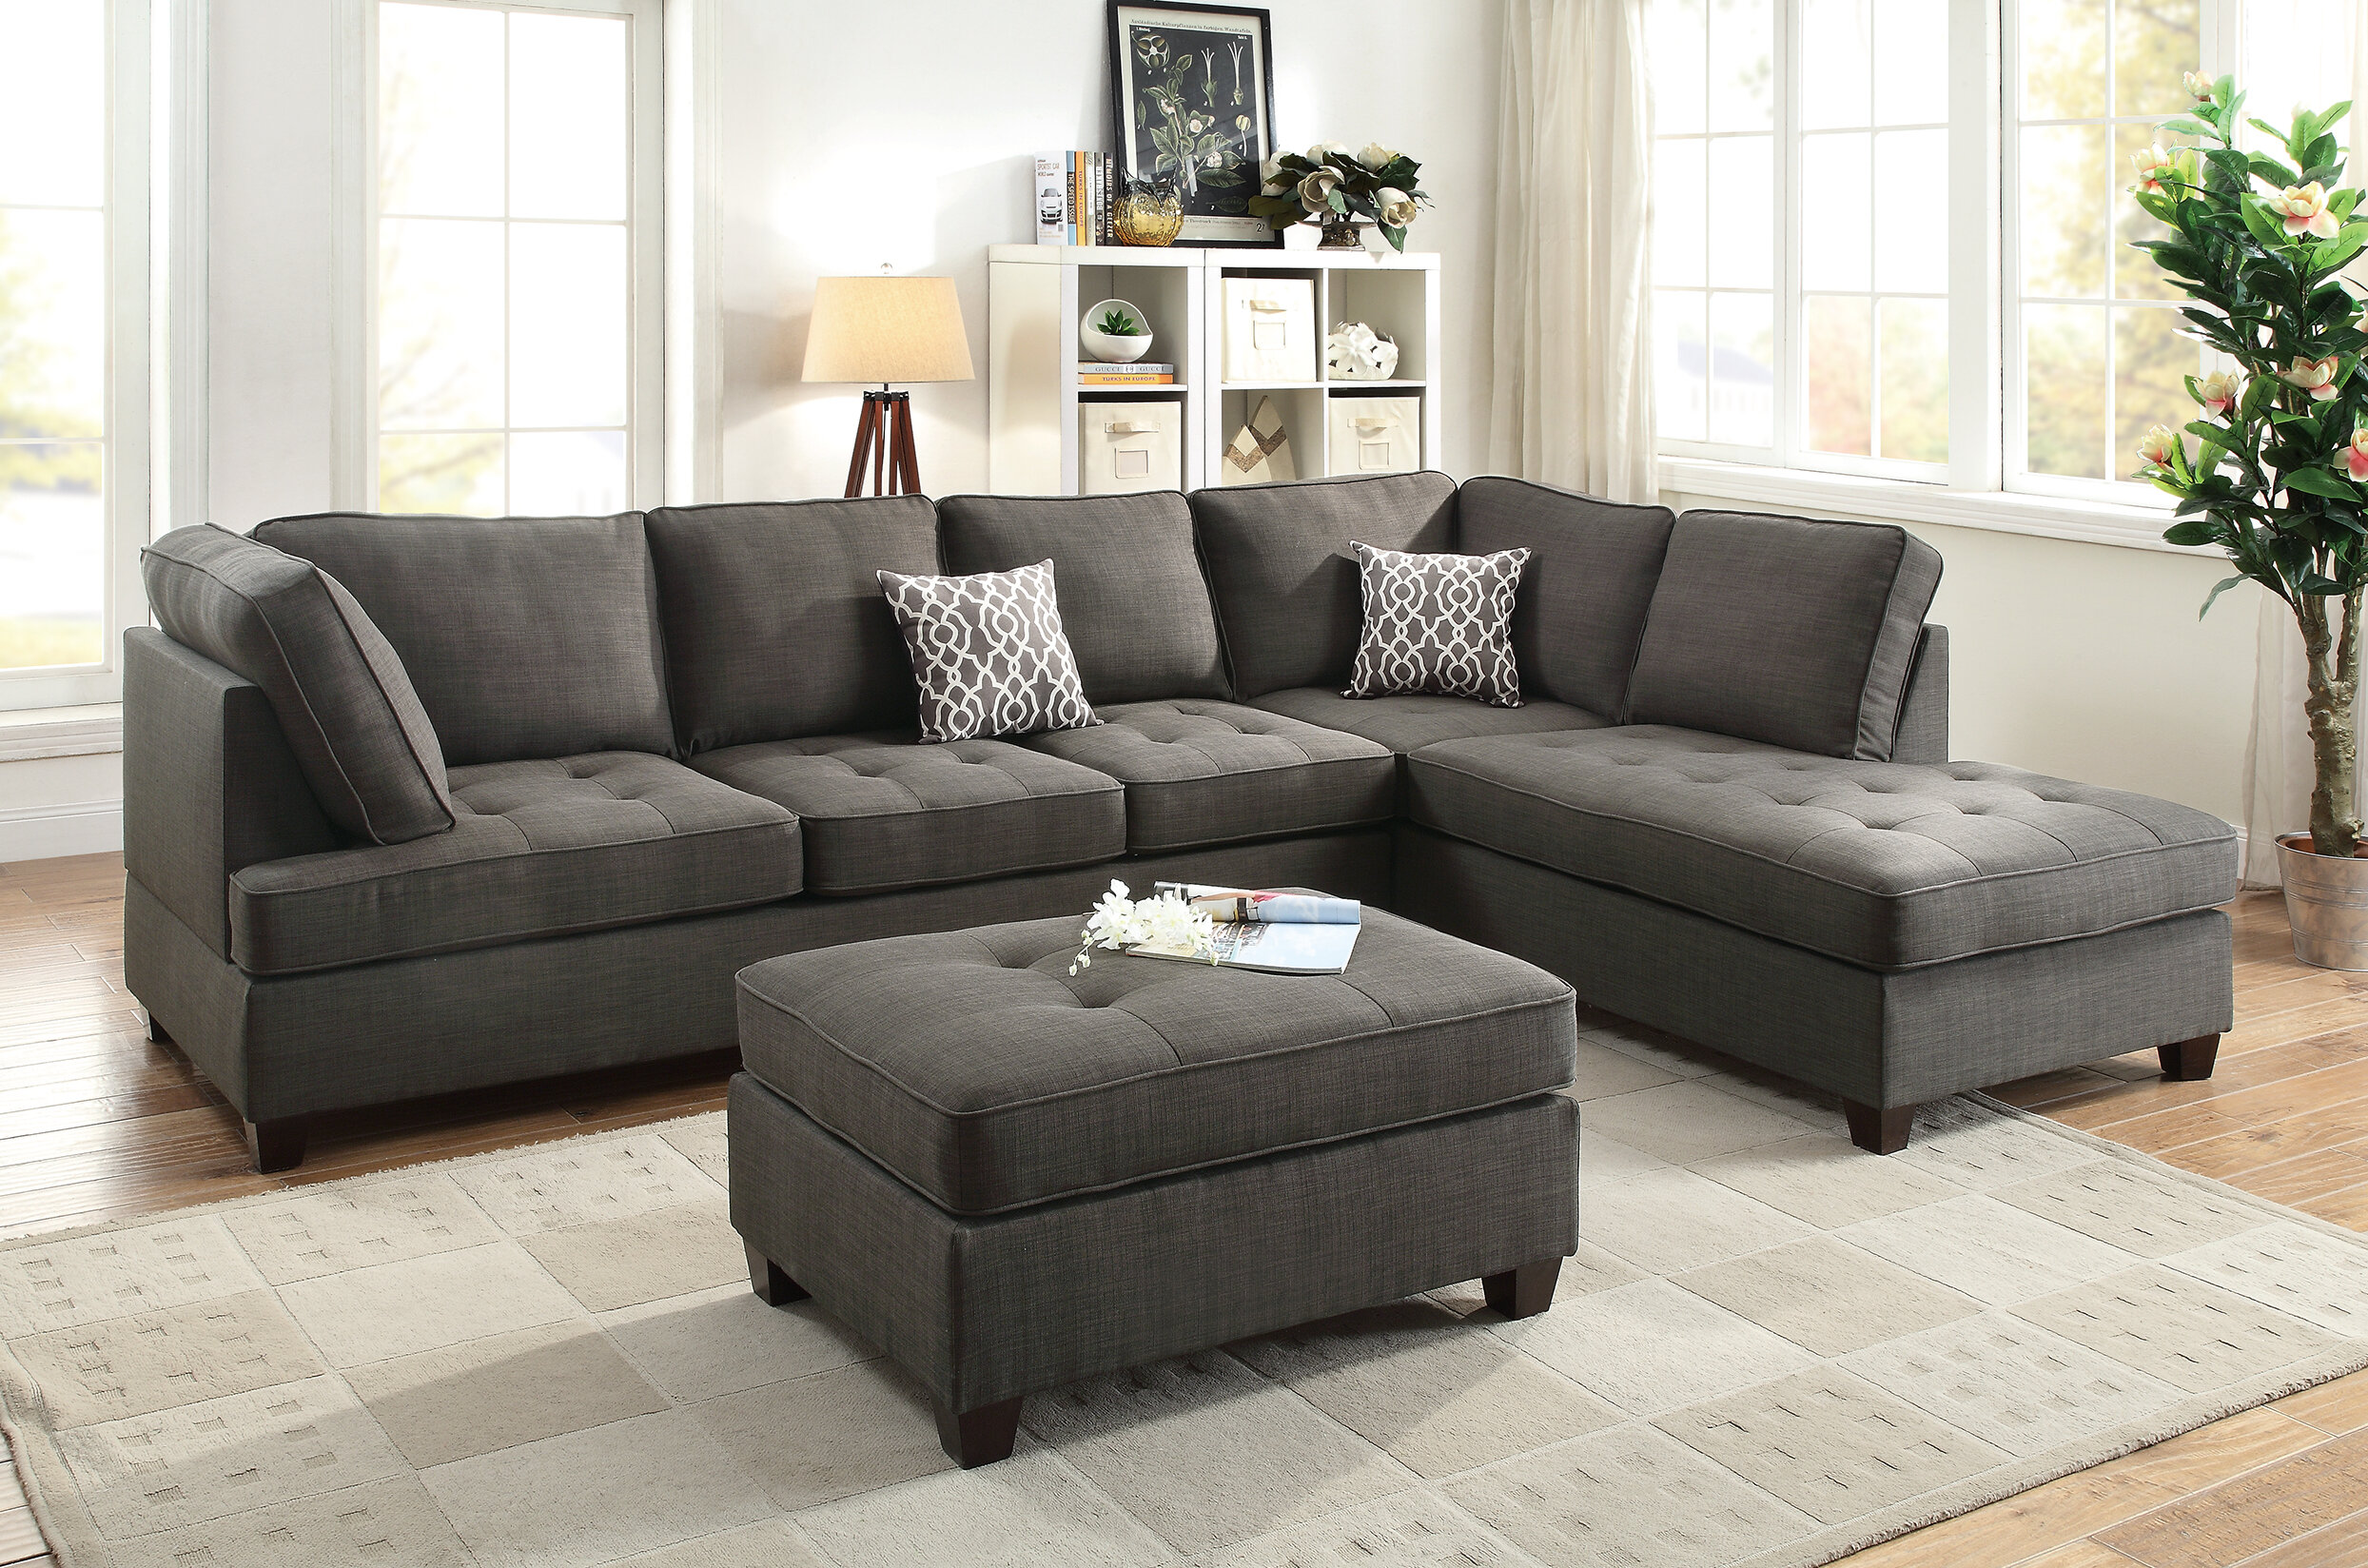 Contemporary 7pcs Sectional Modern Sofa Microsuede Reversible Chaise Ottoman USA 